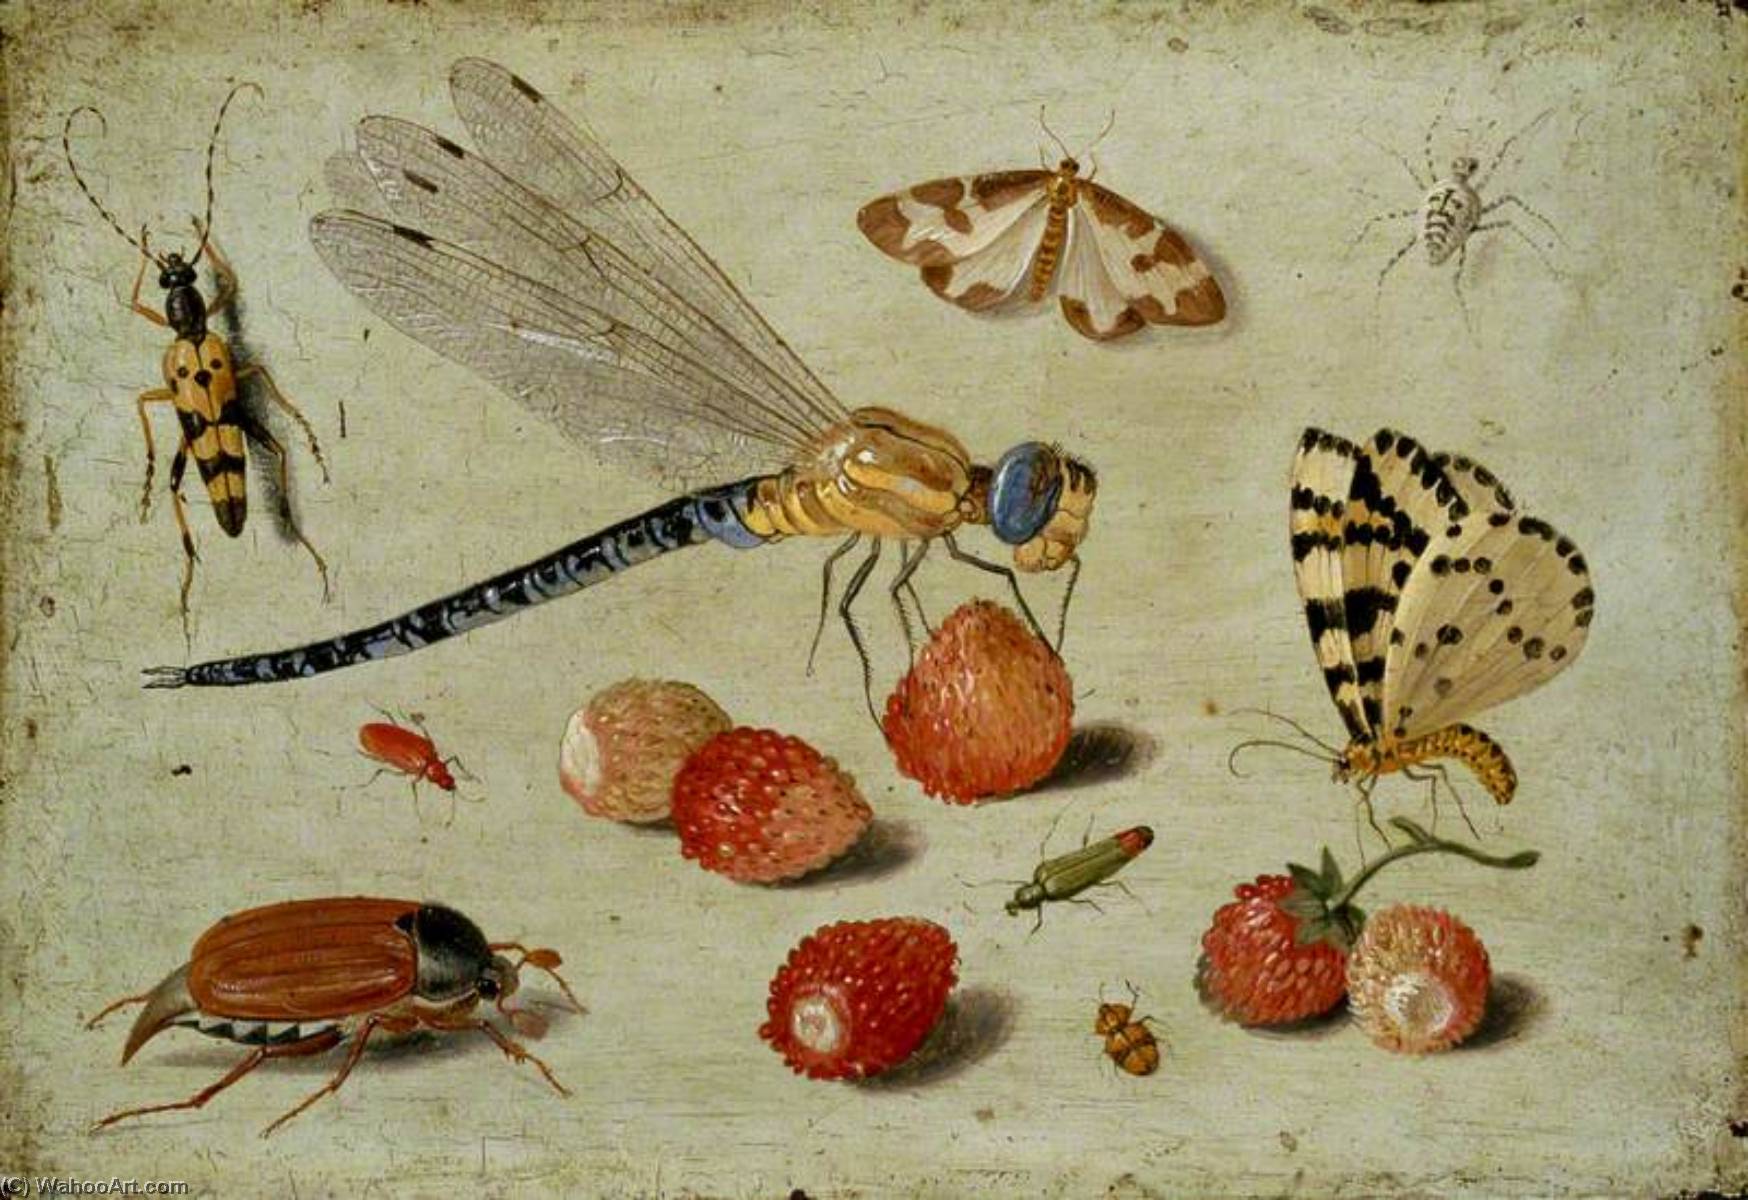 WikiOO.org - Enciclopedia of Fine Arts - Pictura, lucrări de artă Jan Van Kessel The Elder - A Dragon fly, two Moths, a Spider and some Beetles, with wild Strawberries